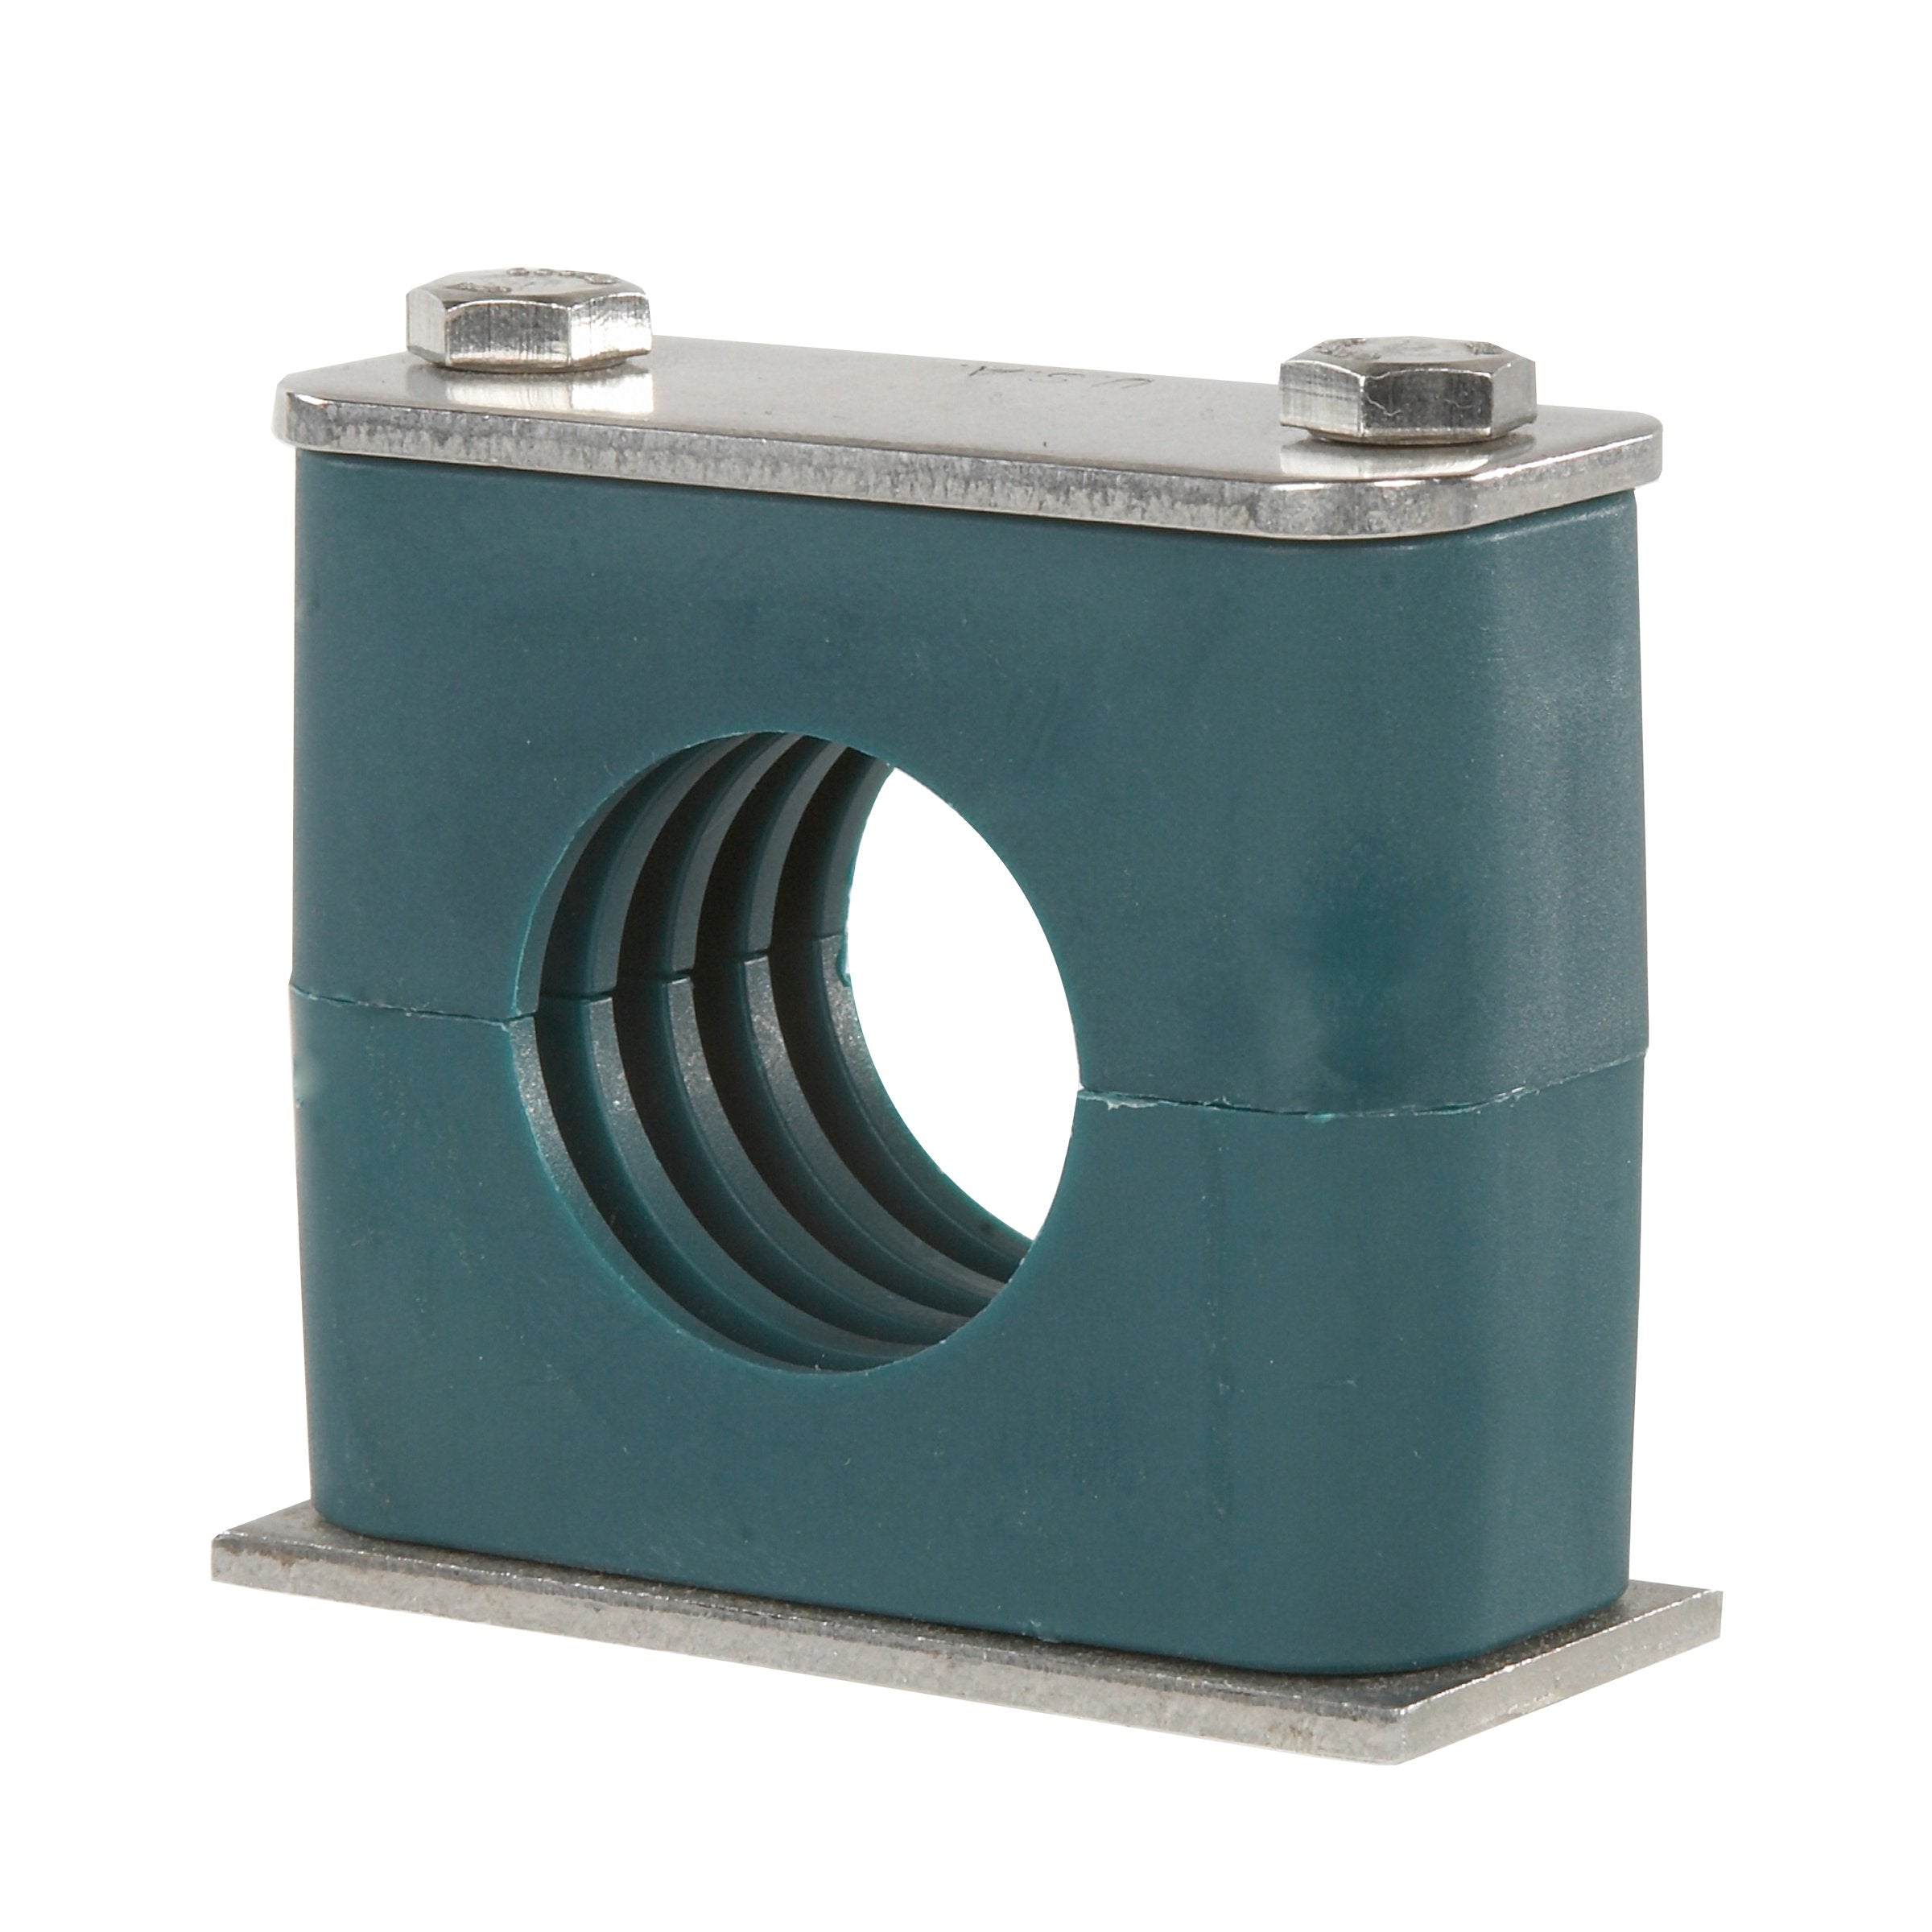 SP-776.1-PP-DP-AS-U-W10 : Stauff Clamp, Single Weld Plate, 3 inch (76.1mm) OD, for 3" Tube, Green PP Insert, Profiled Interior, Carbon Steel